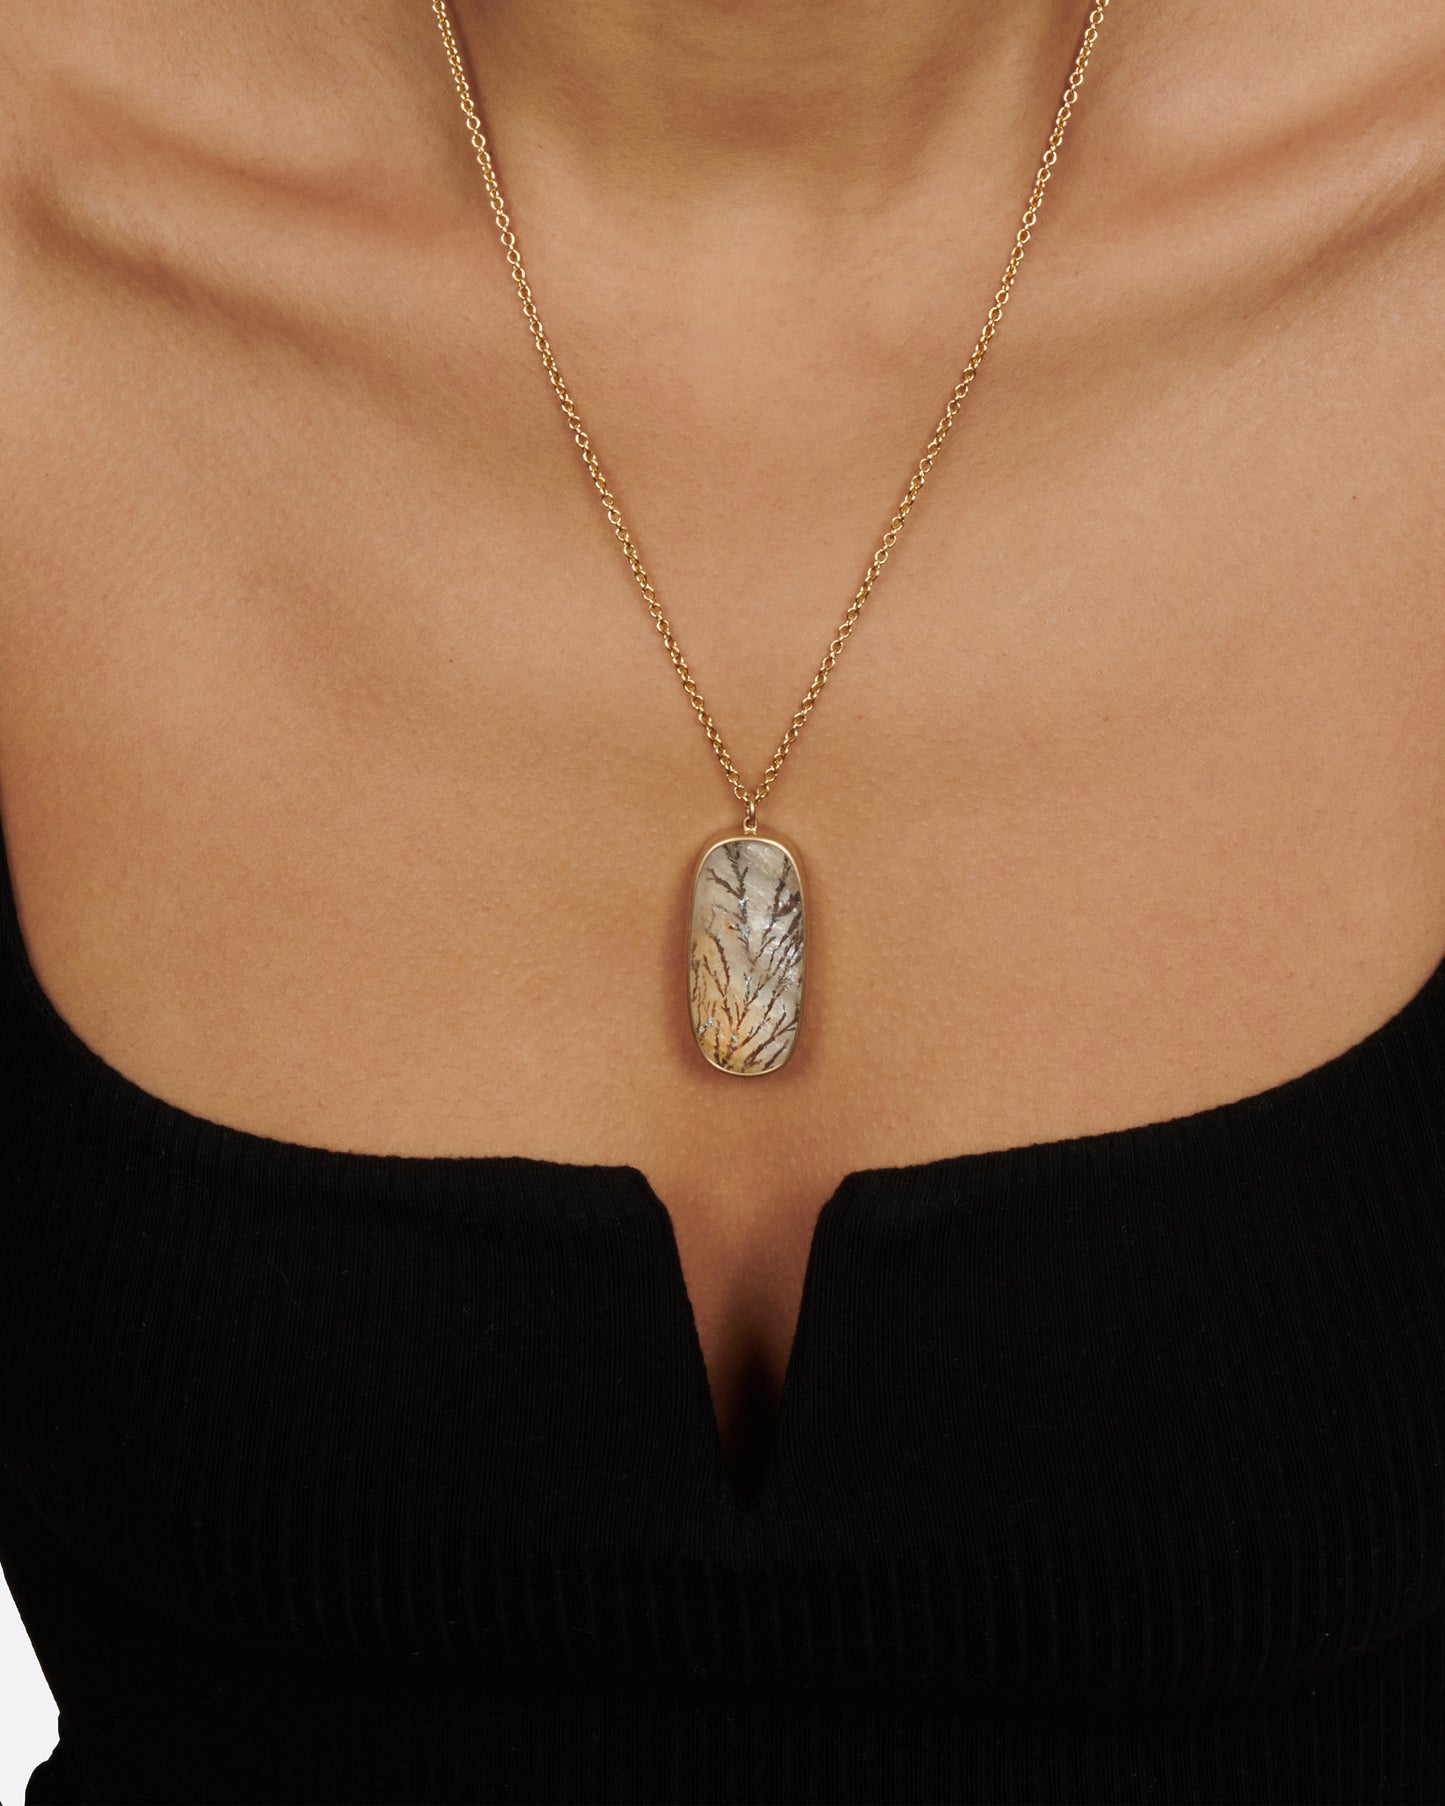 This oval dendritic quartz pendant has fern like iron strands growing throughout and a notable changing luster, known as chatoyance.